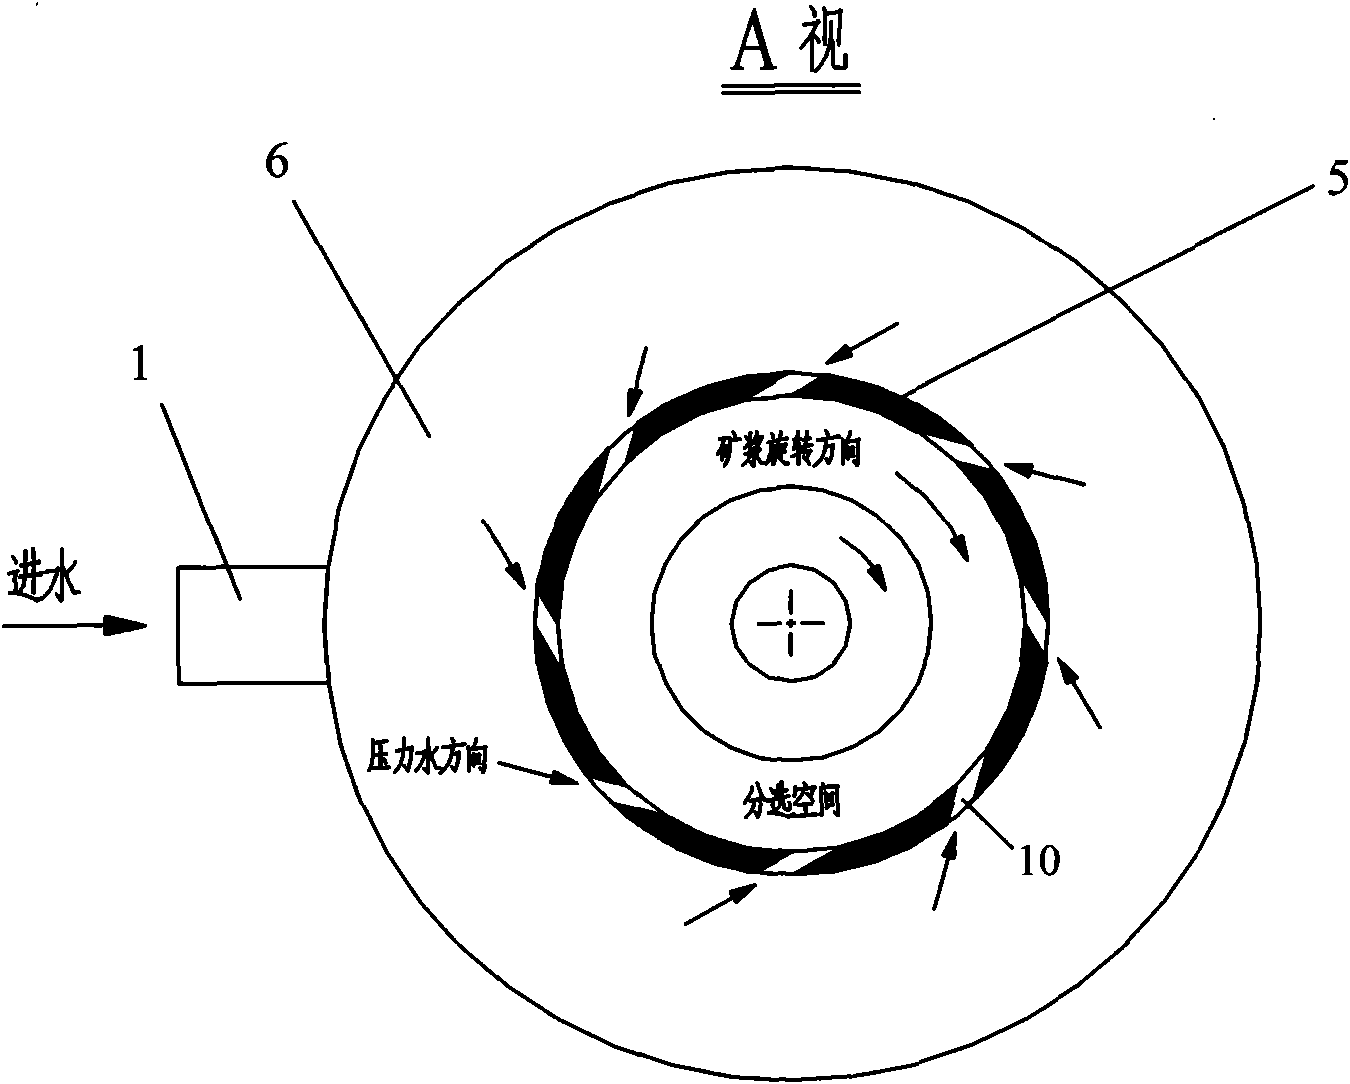 Spiral flow continuous centrifugal classifier